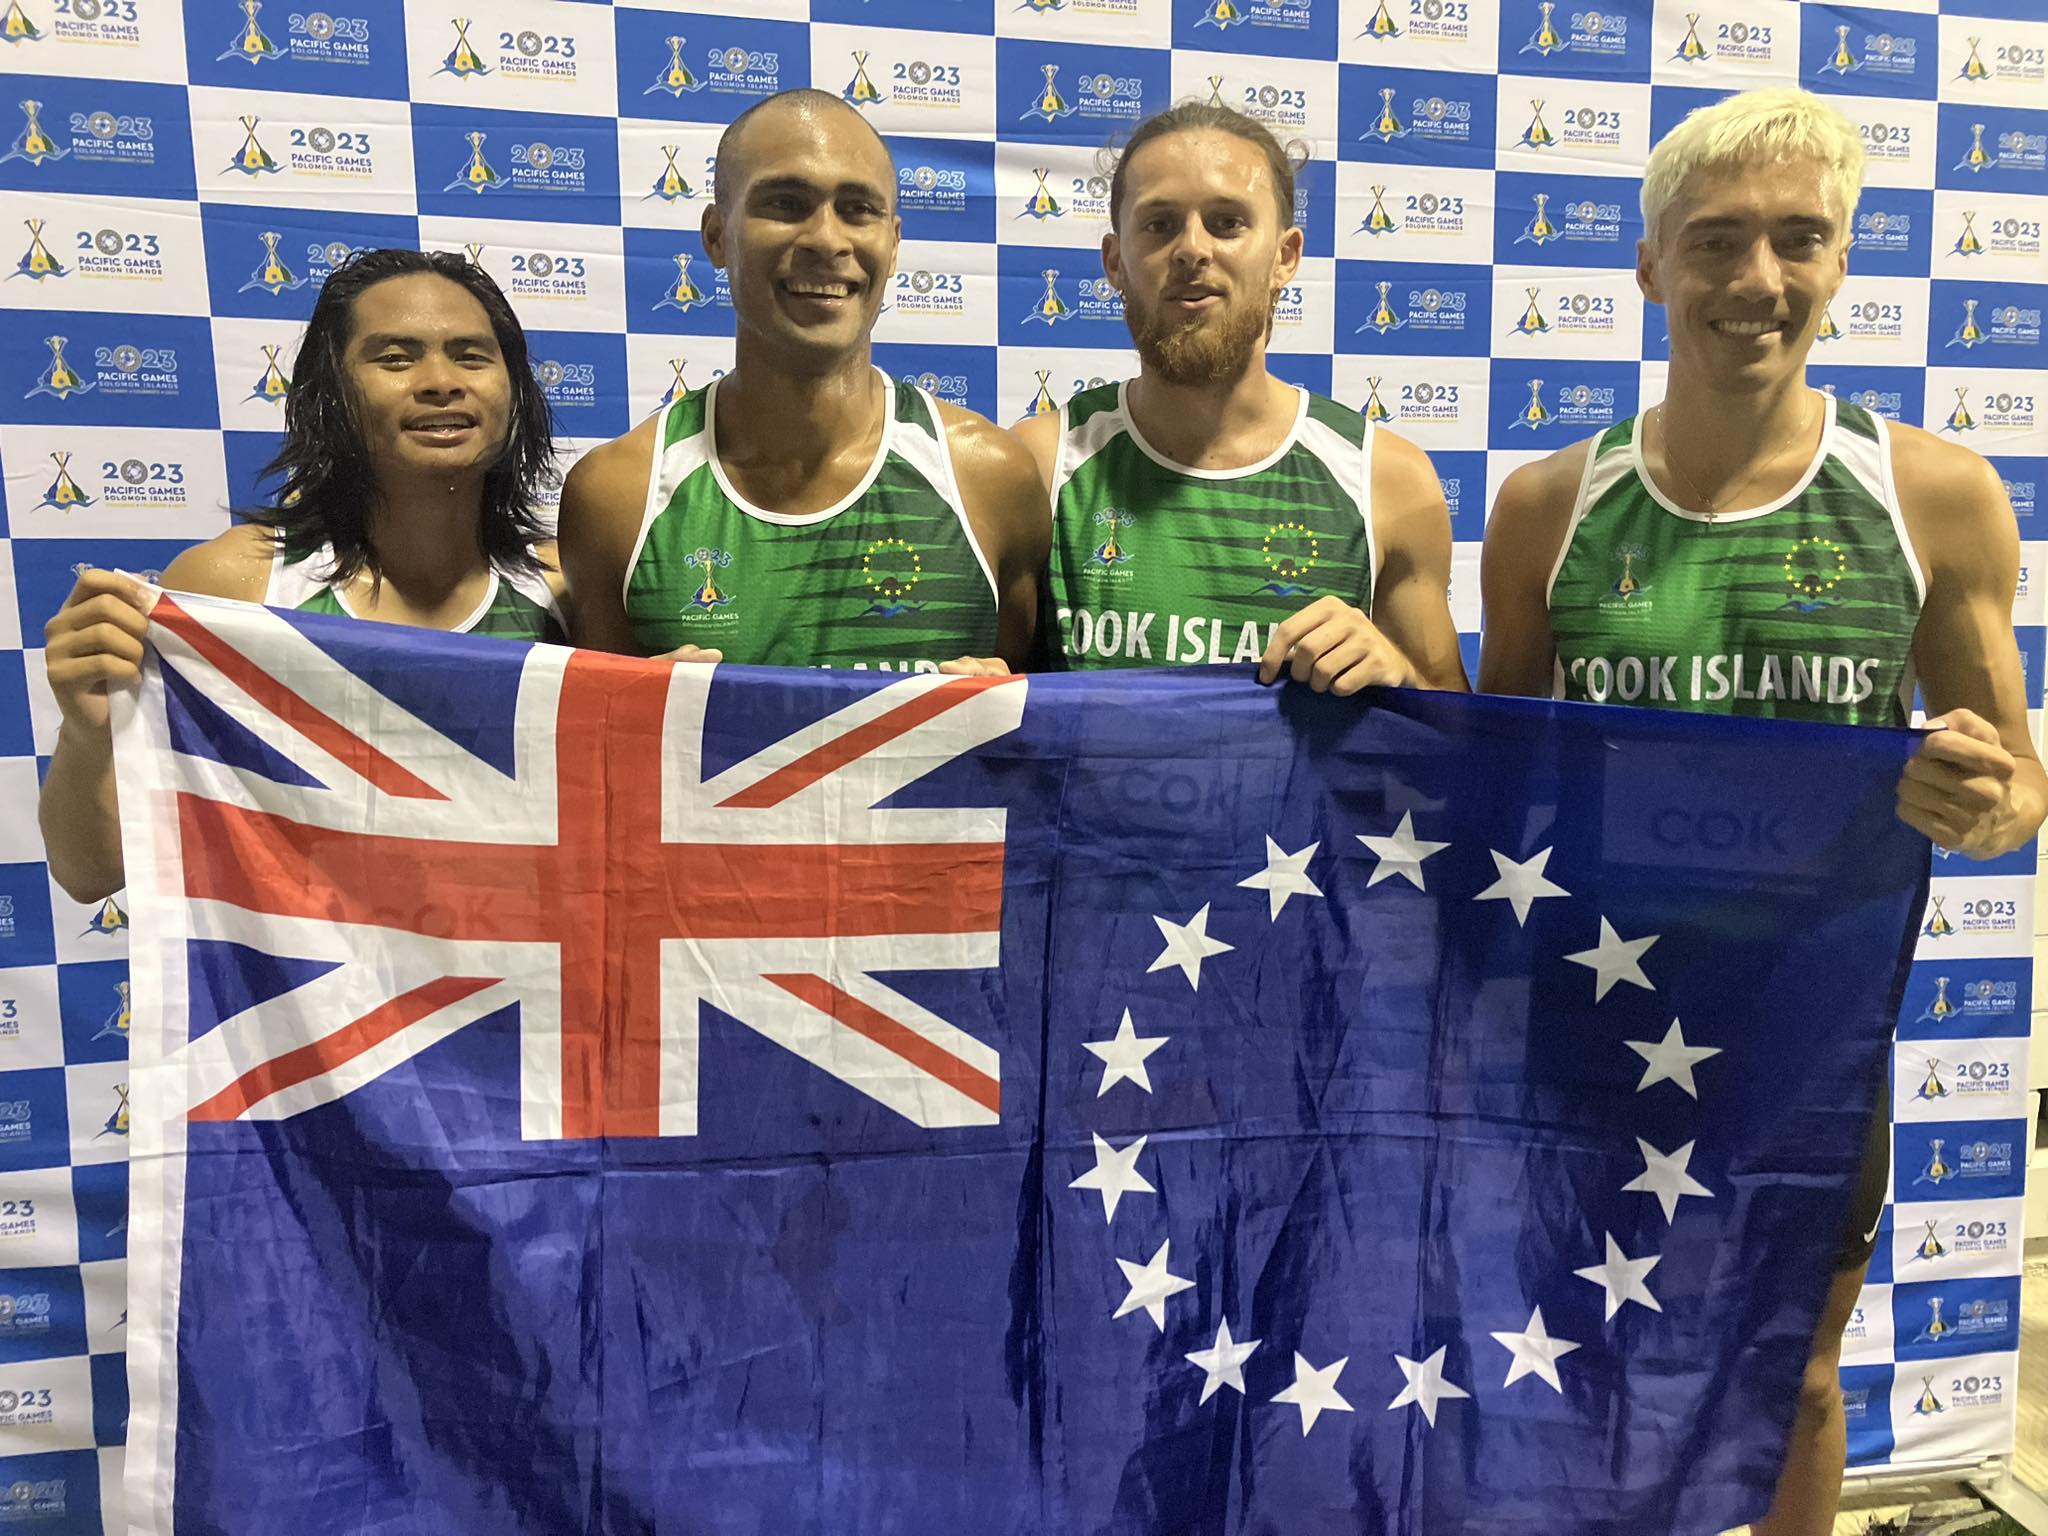 Athletics team clocks new personal bests, Beddoes claims bronze